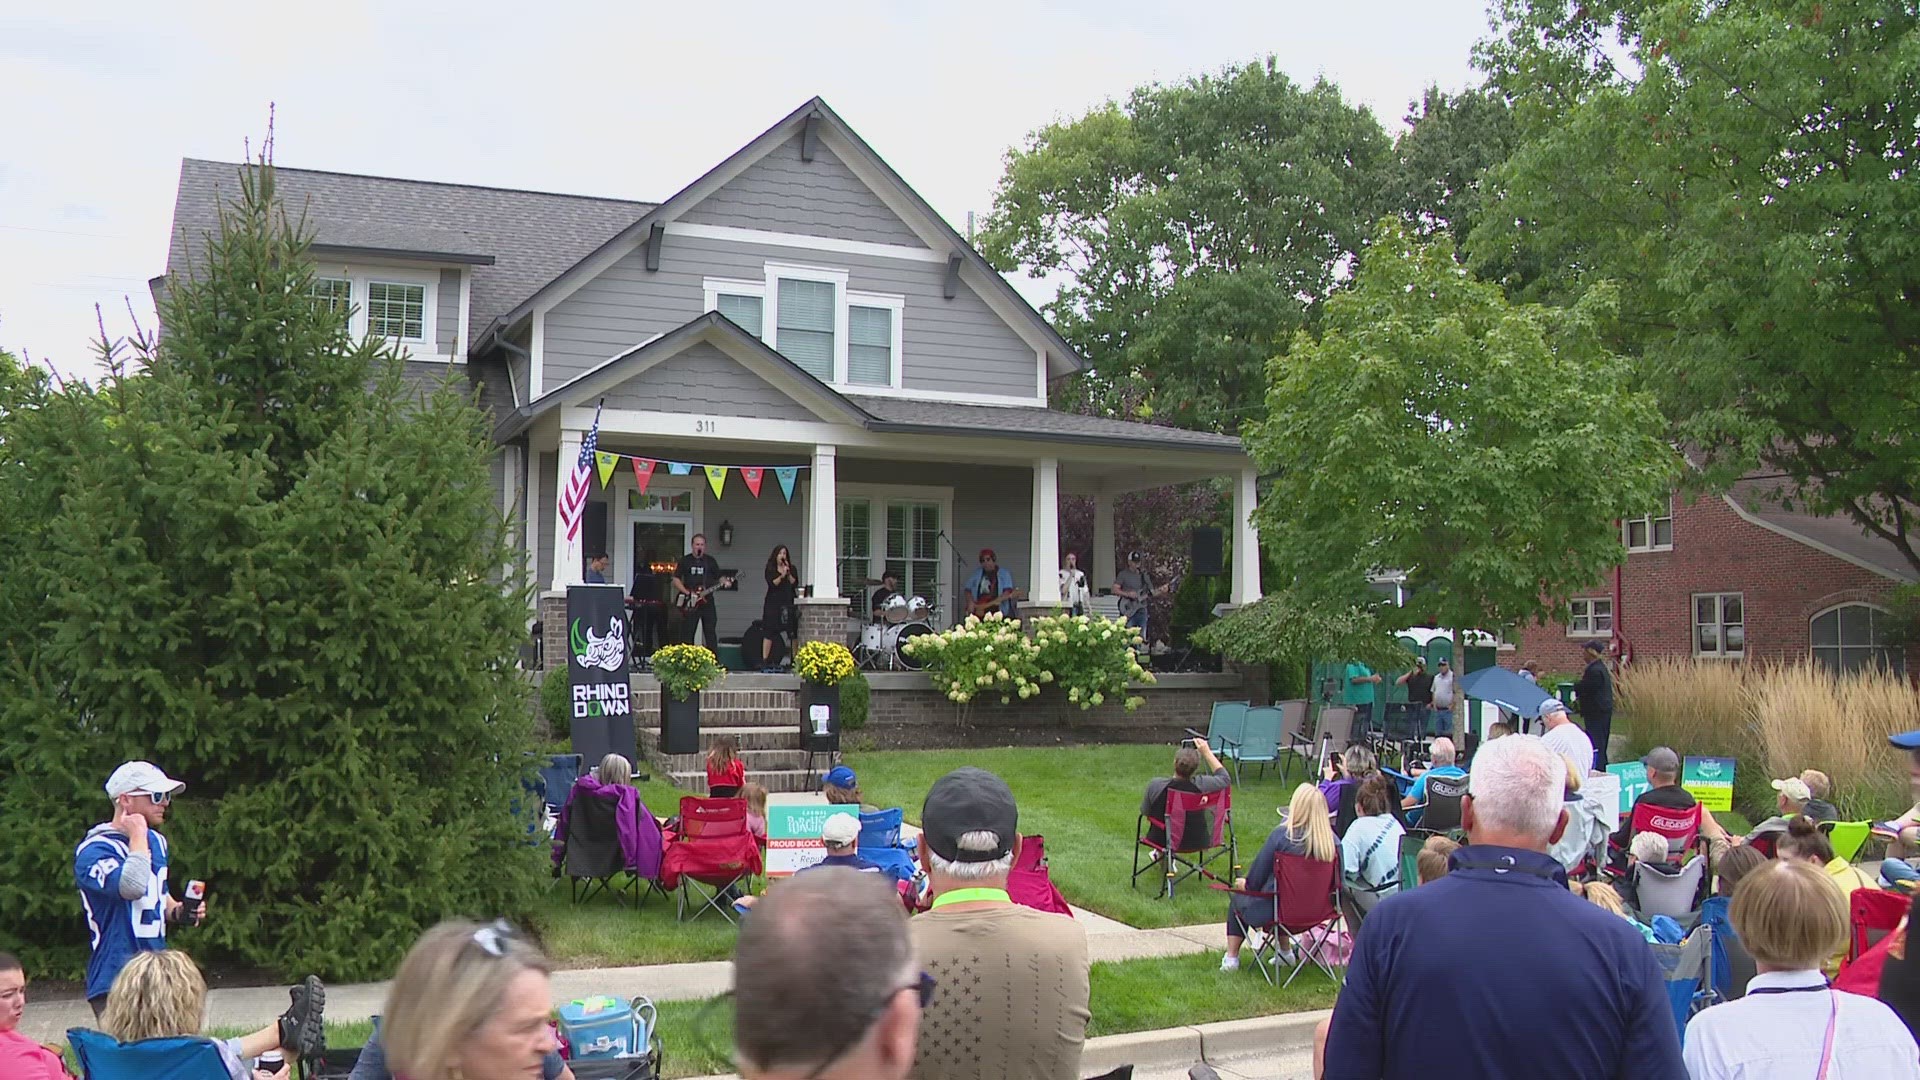 The family friendly event features dozens of musical acts from a wide range of styles, all playing on people's front porches.